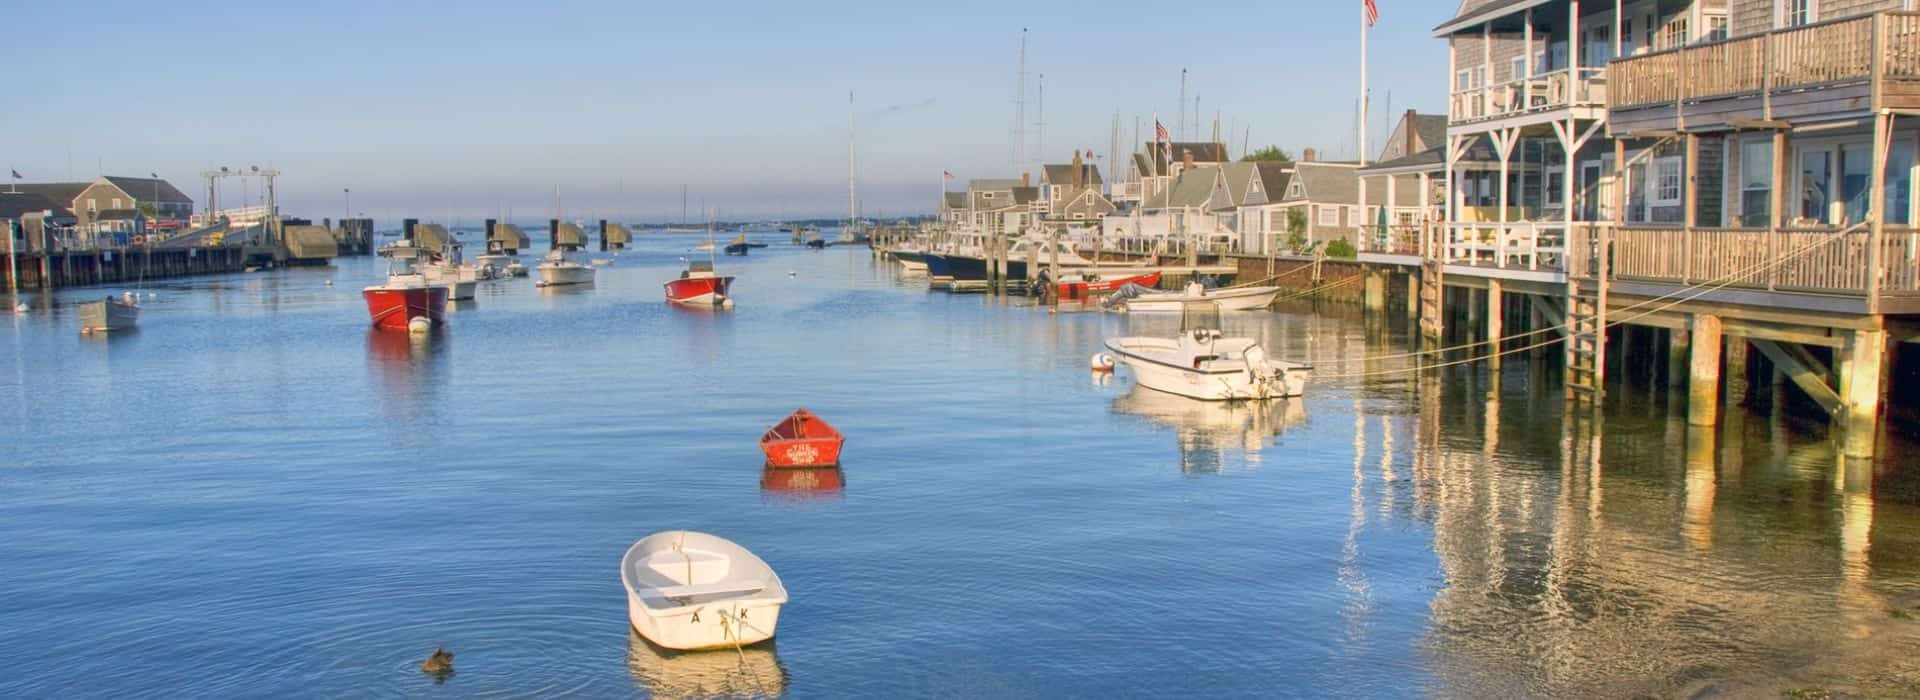 Suggested Vacation Activities for Your Visit to Nantucket Island